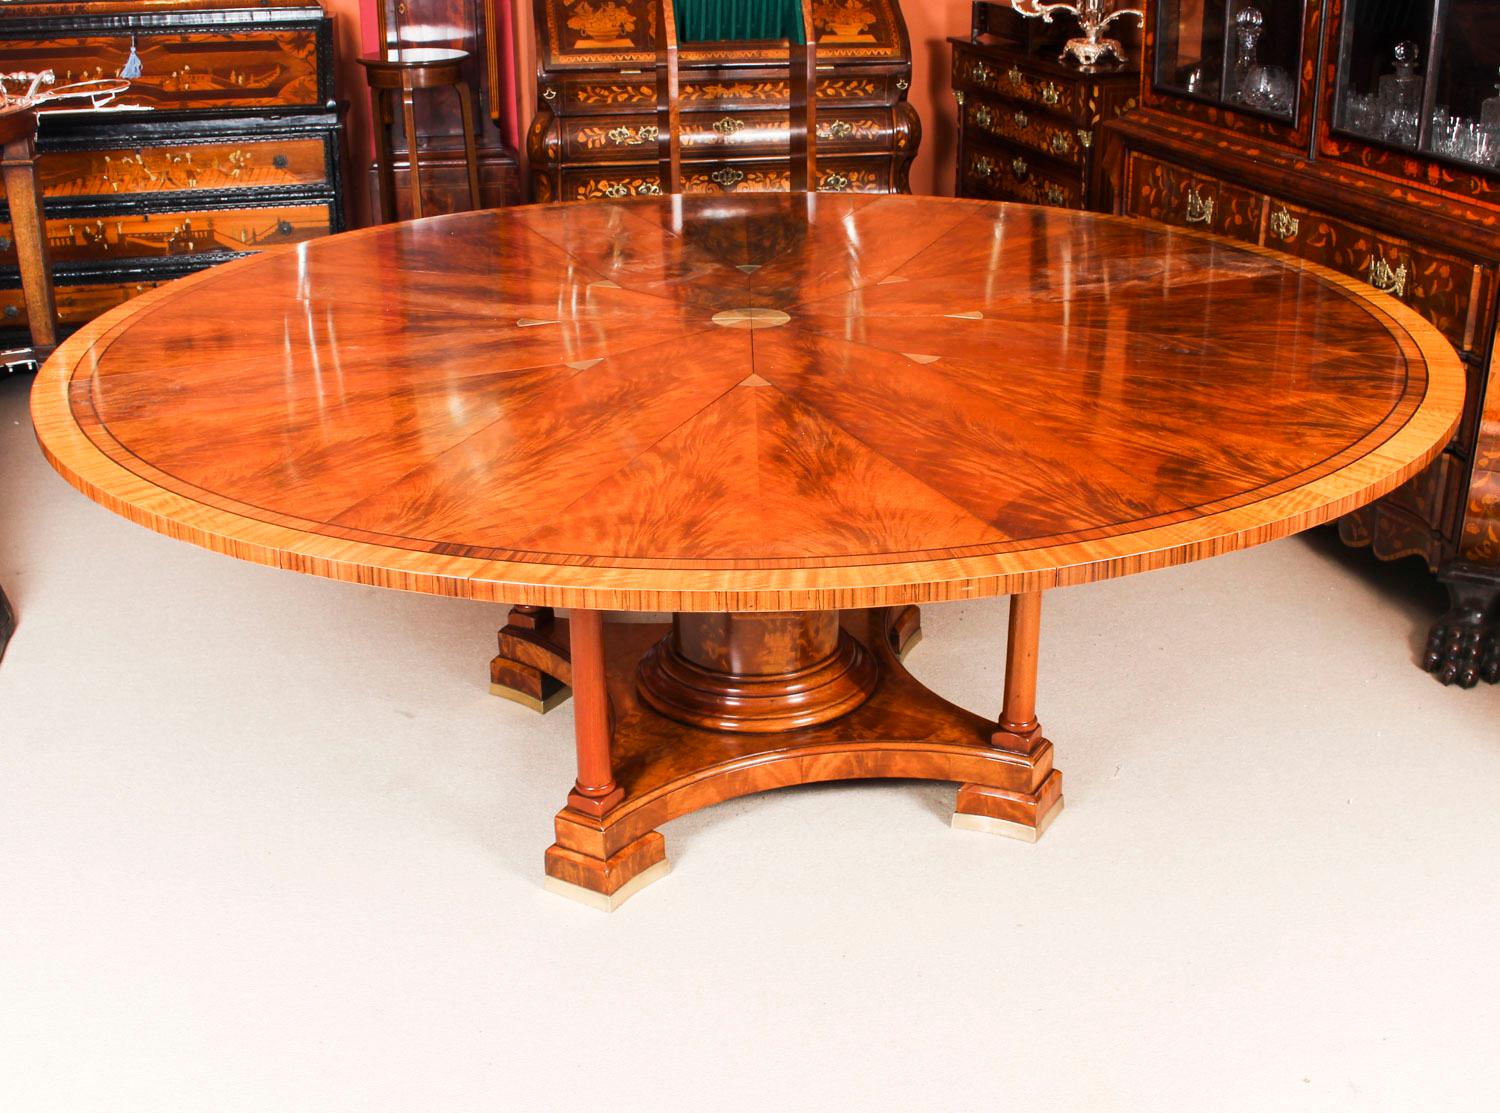 This is a beautiful dining set comprising a flame mahogany expanding dining table in the manner of Johnson, Jupe & Co, dating from the early 20th century, and a matching set of ten antique balloon back dining chairs.

The hexadecagon round top